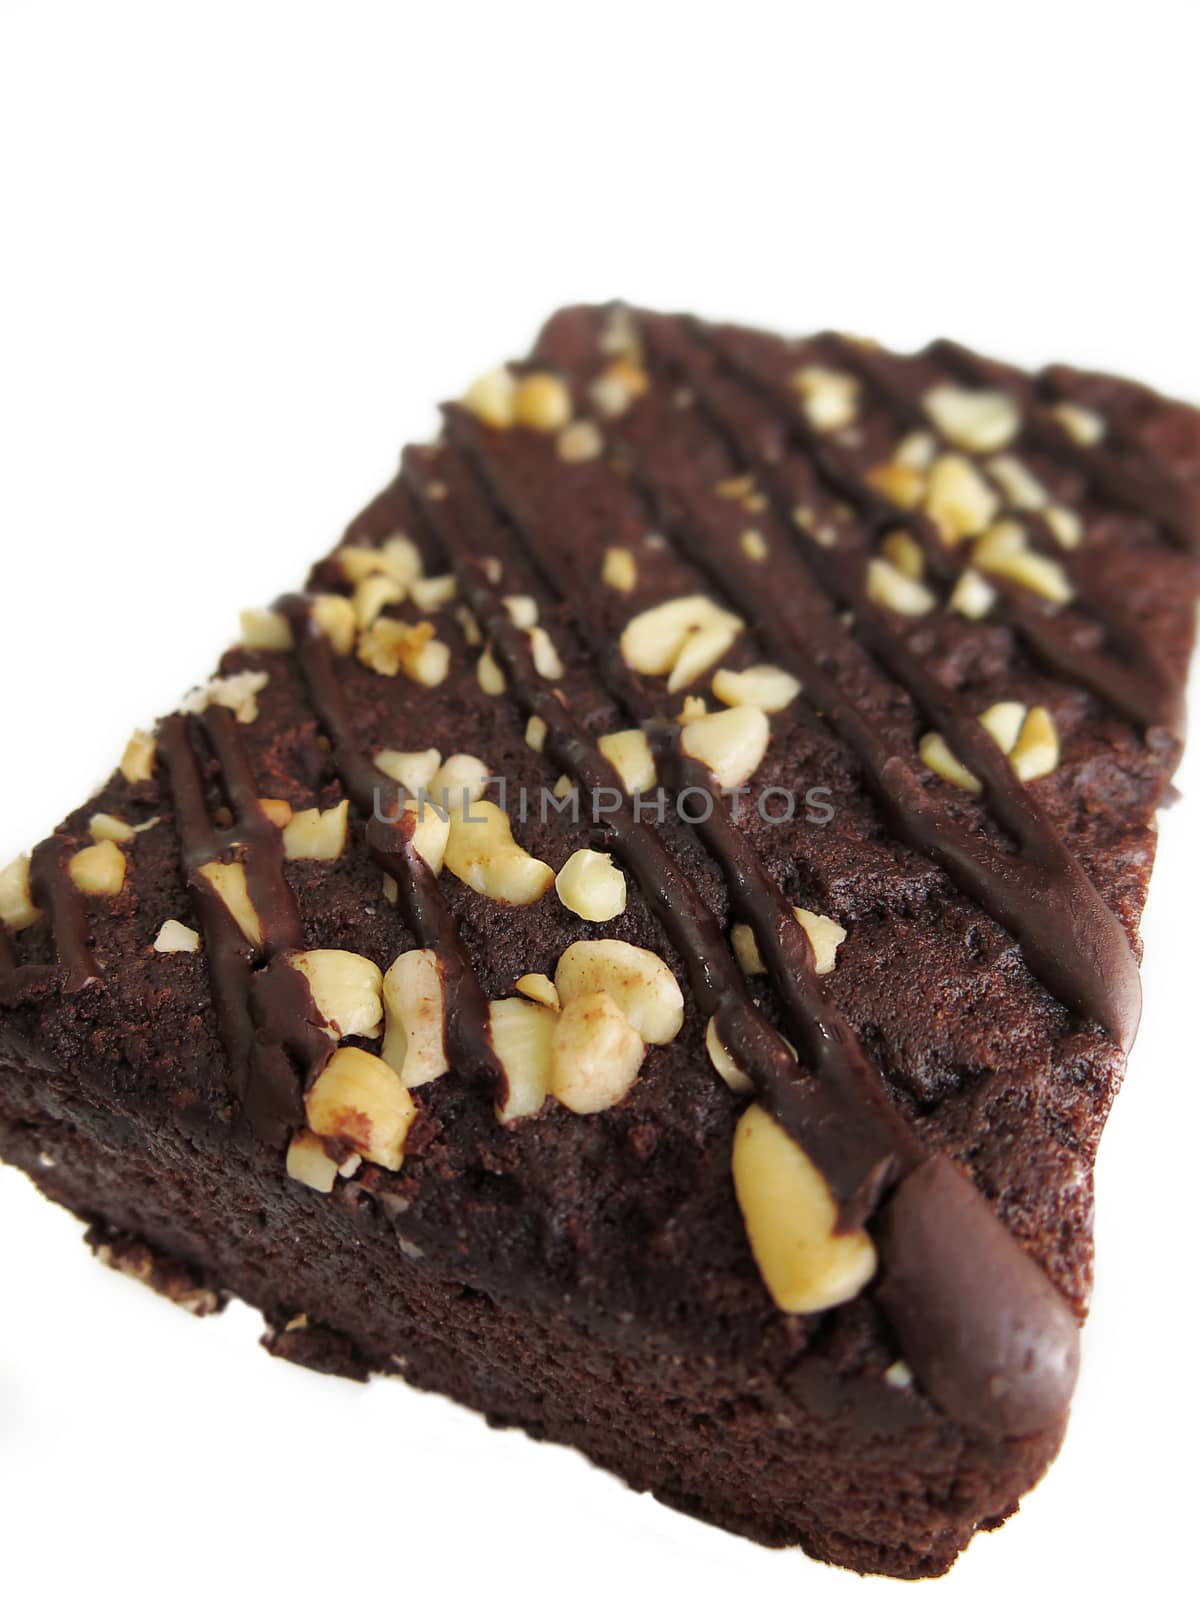 Chocolate brownies isolated on a white background, close up